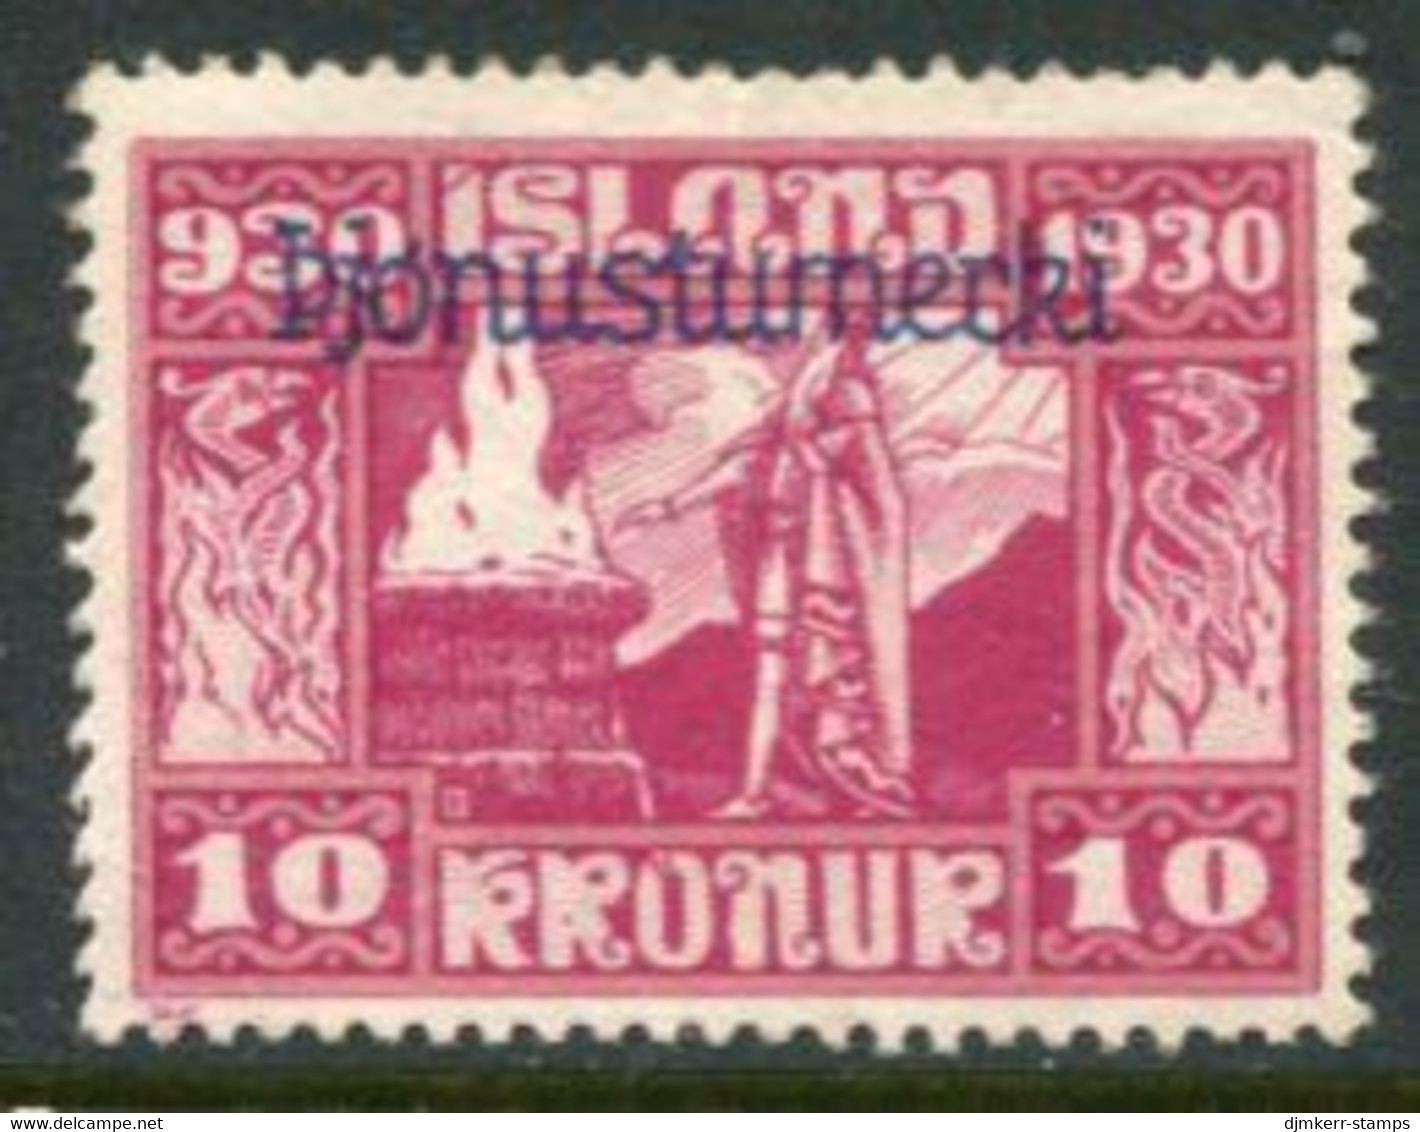 ICELAND 1930 Millenary Of Parliament 10 Kr,. Overprinted Official MNH / ** But May Be Regummed .  Michel Dienst 58 - Officials